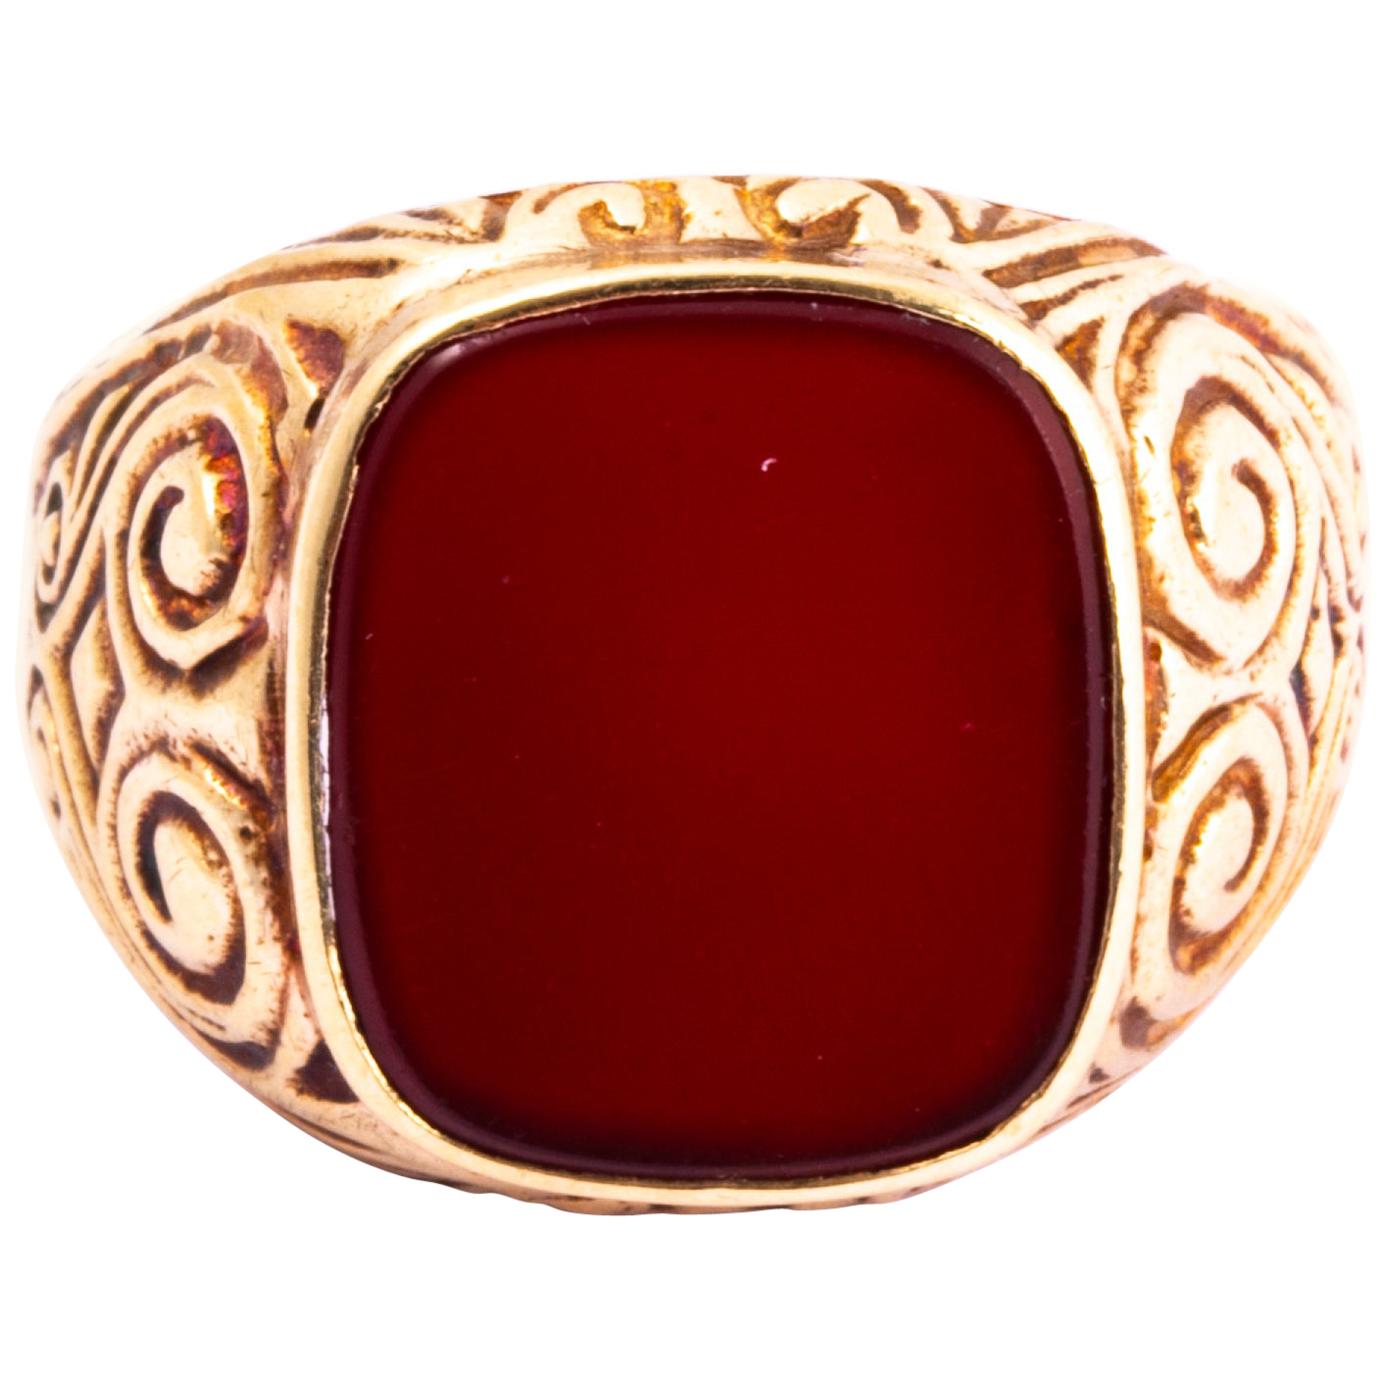 Antique Carnelian and 9 Carat Gold Signet Ring